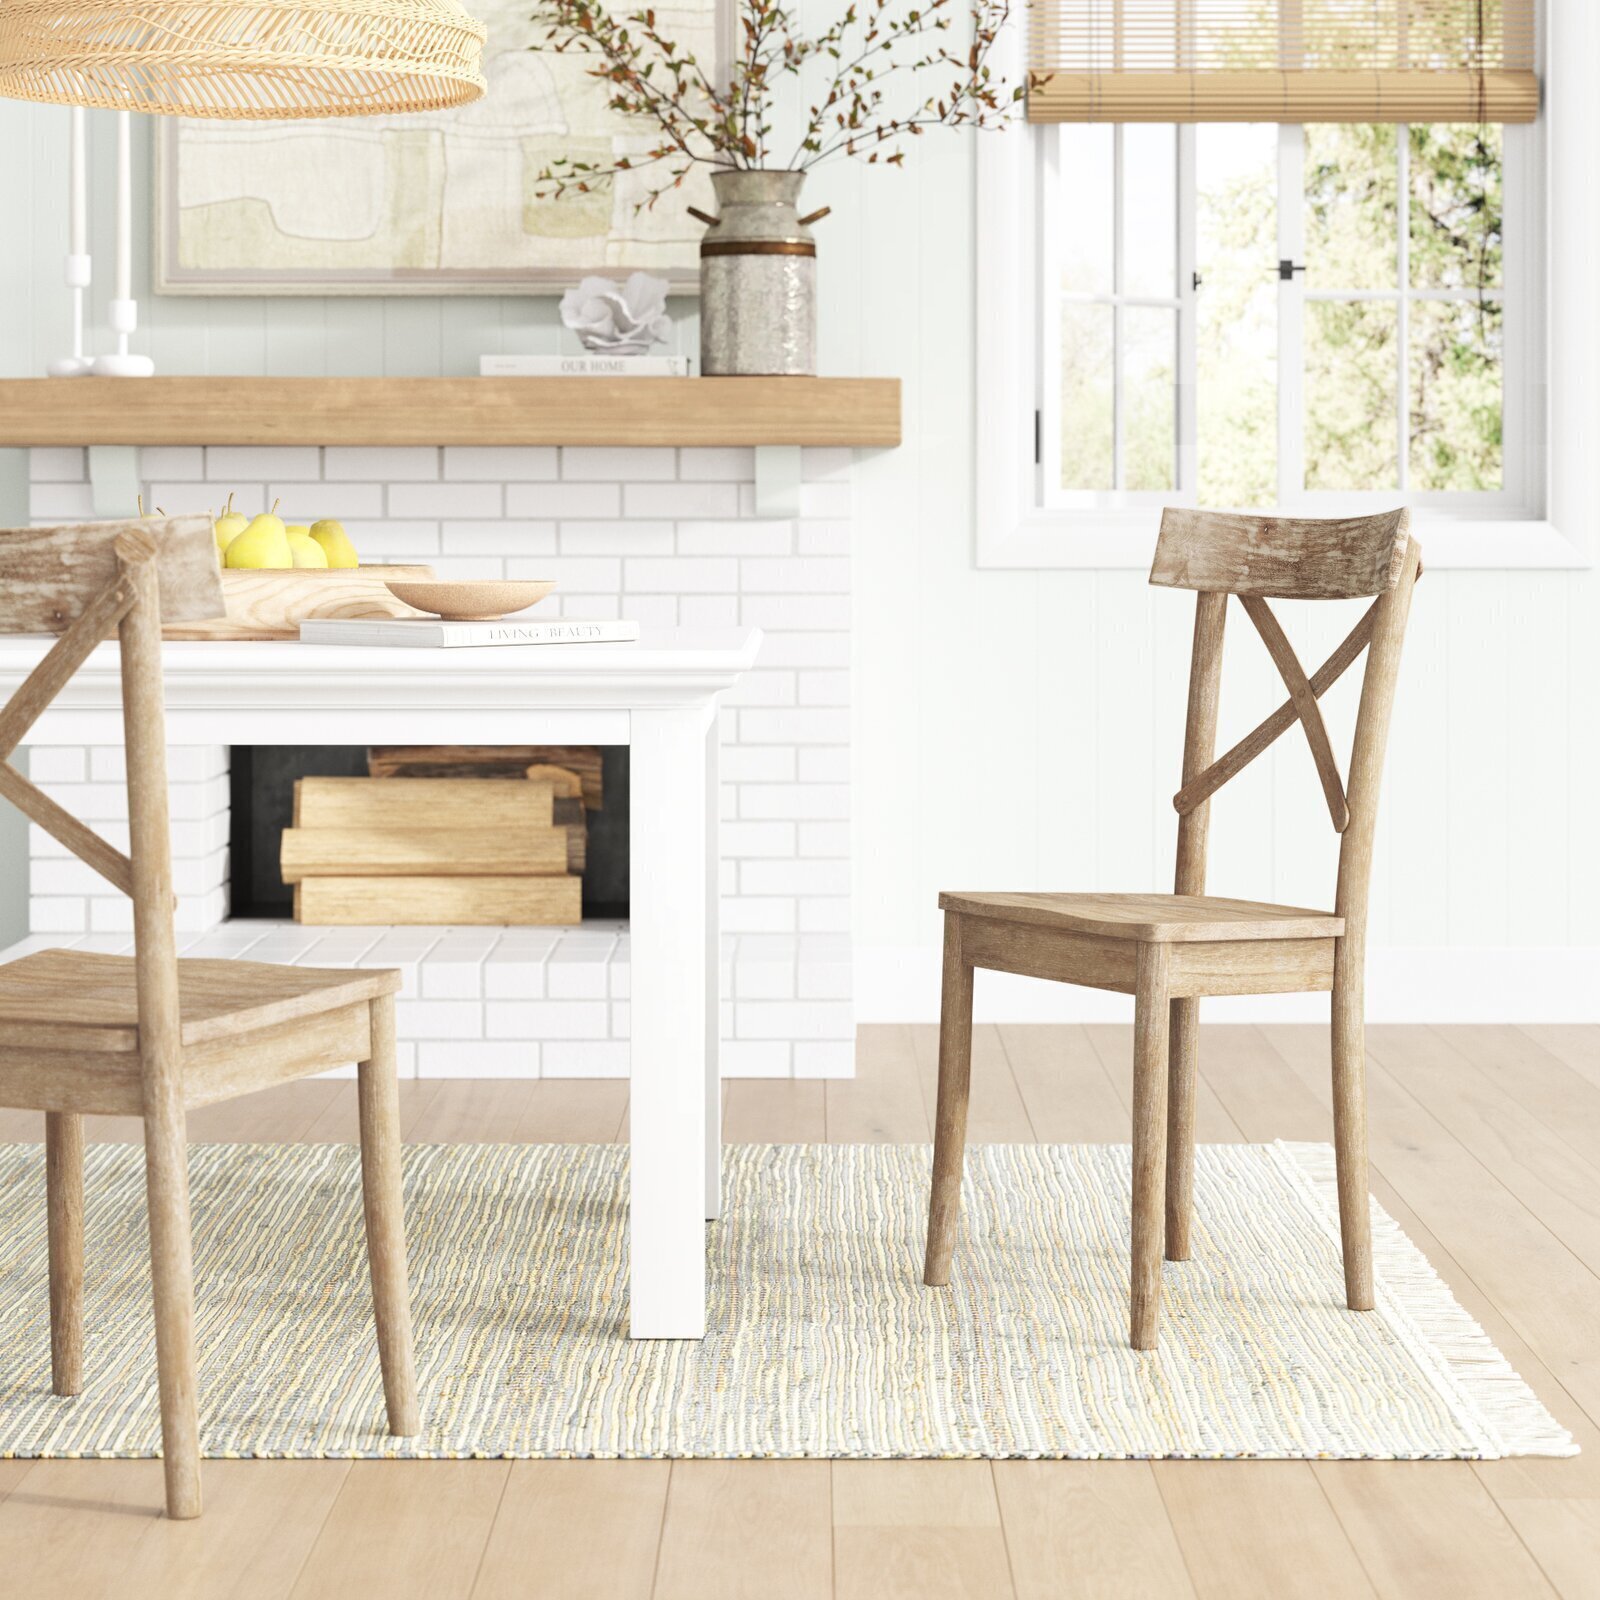 Farmhouse Wooden Cross Back Chairs